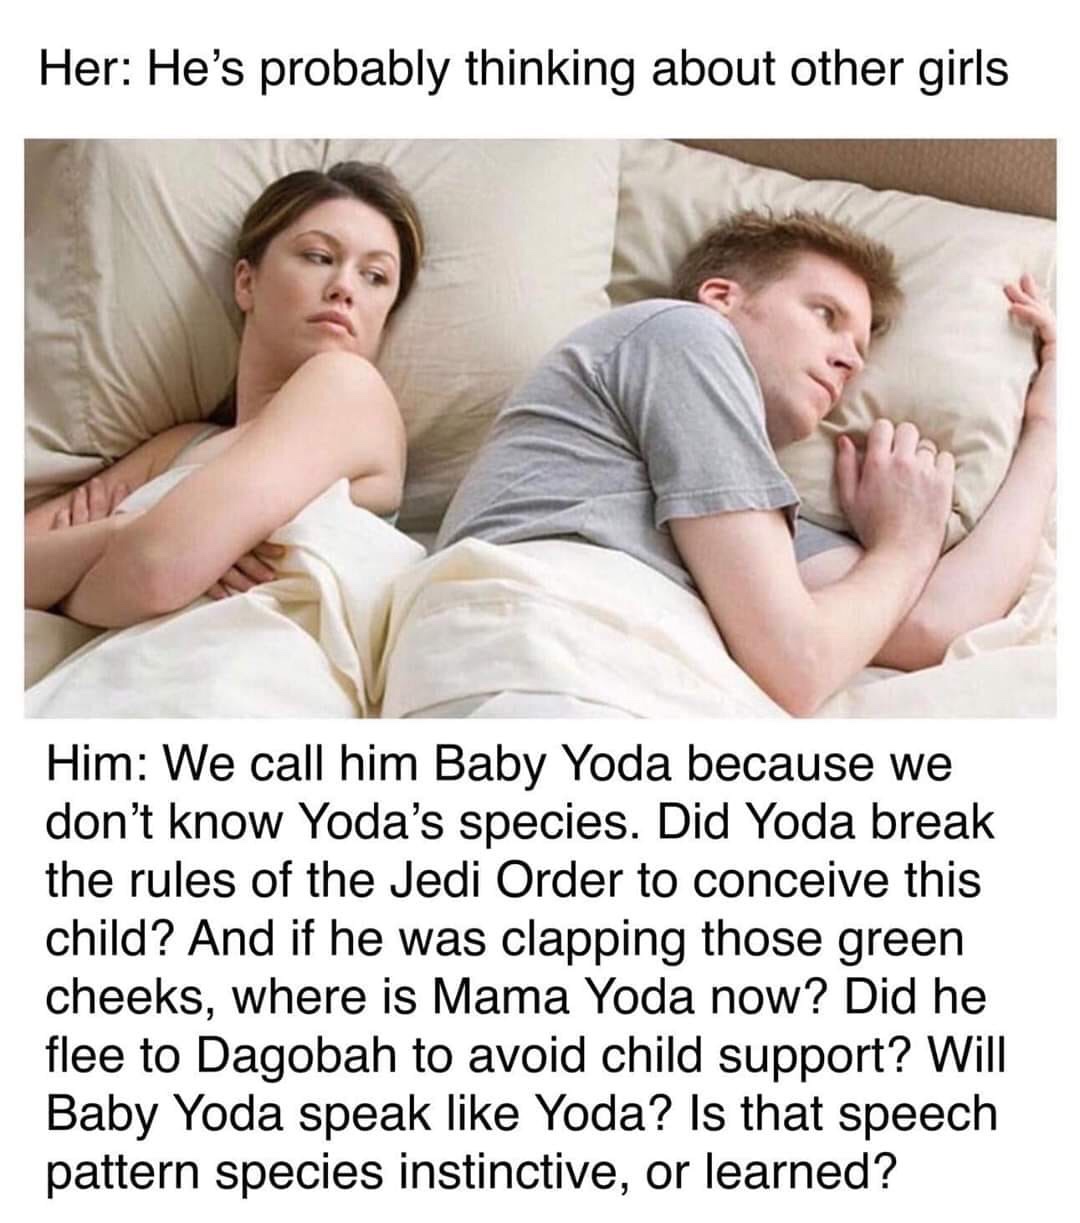 he's probably thinking meme - Her He's probably thinking about other girls Him We call him Baby Yoda because we don't know Yoda's species. Did Yoda break the rules of the Jedi Order to conceive this child? And if he was clapping those green cheeks, where 